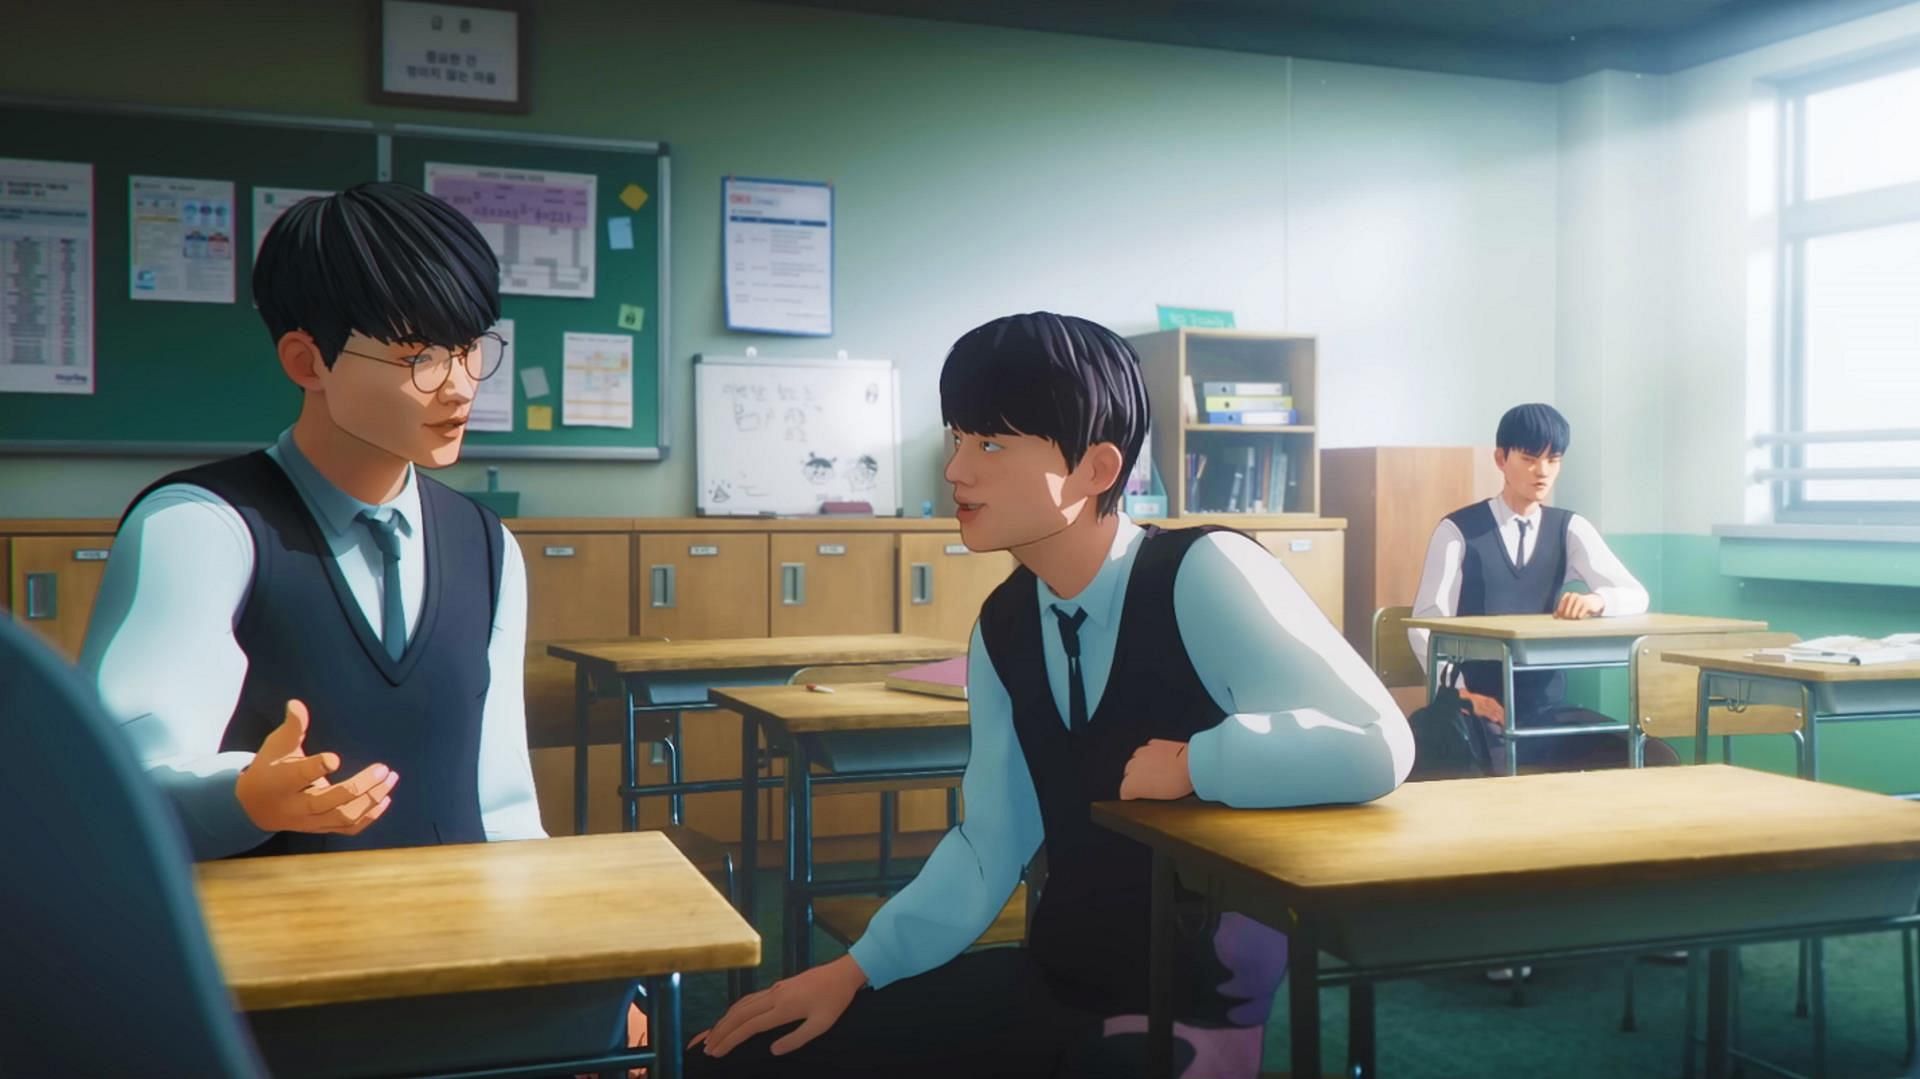 Deft and Faker used to be classmates in high school (Image via Riot Games)